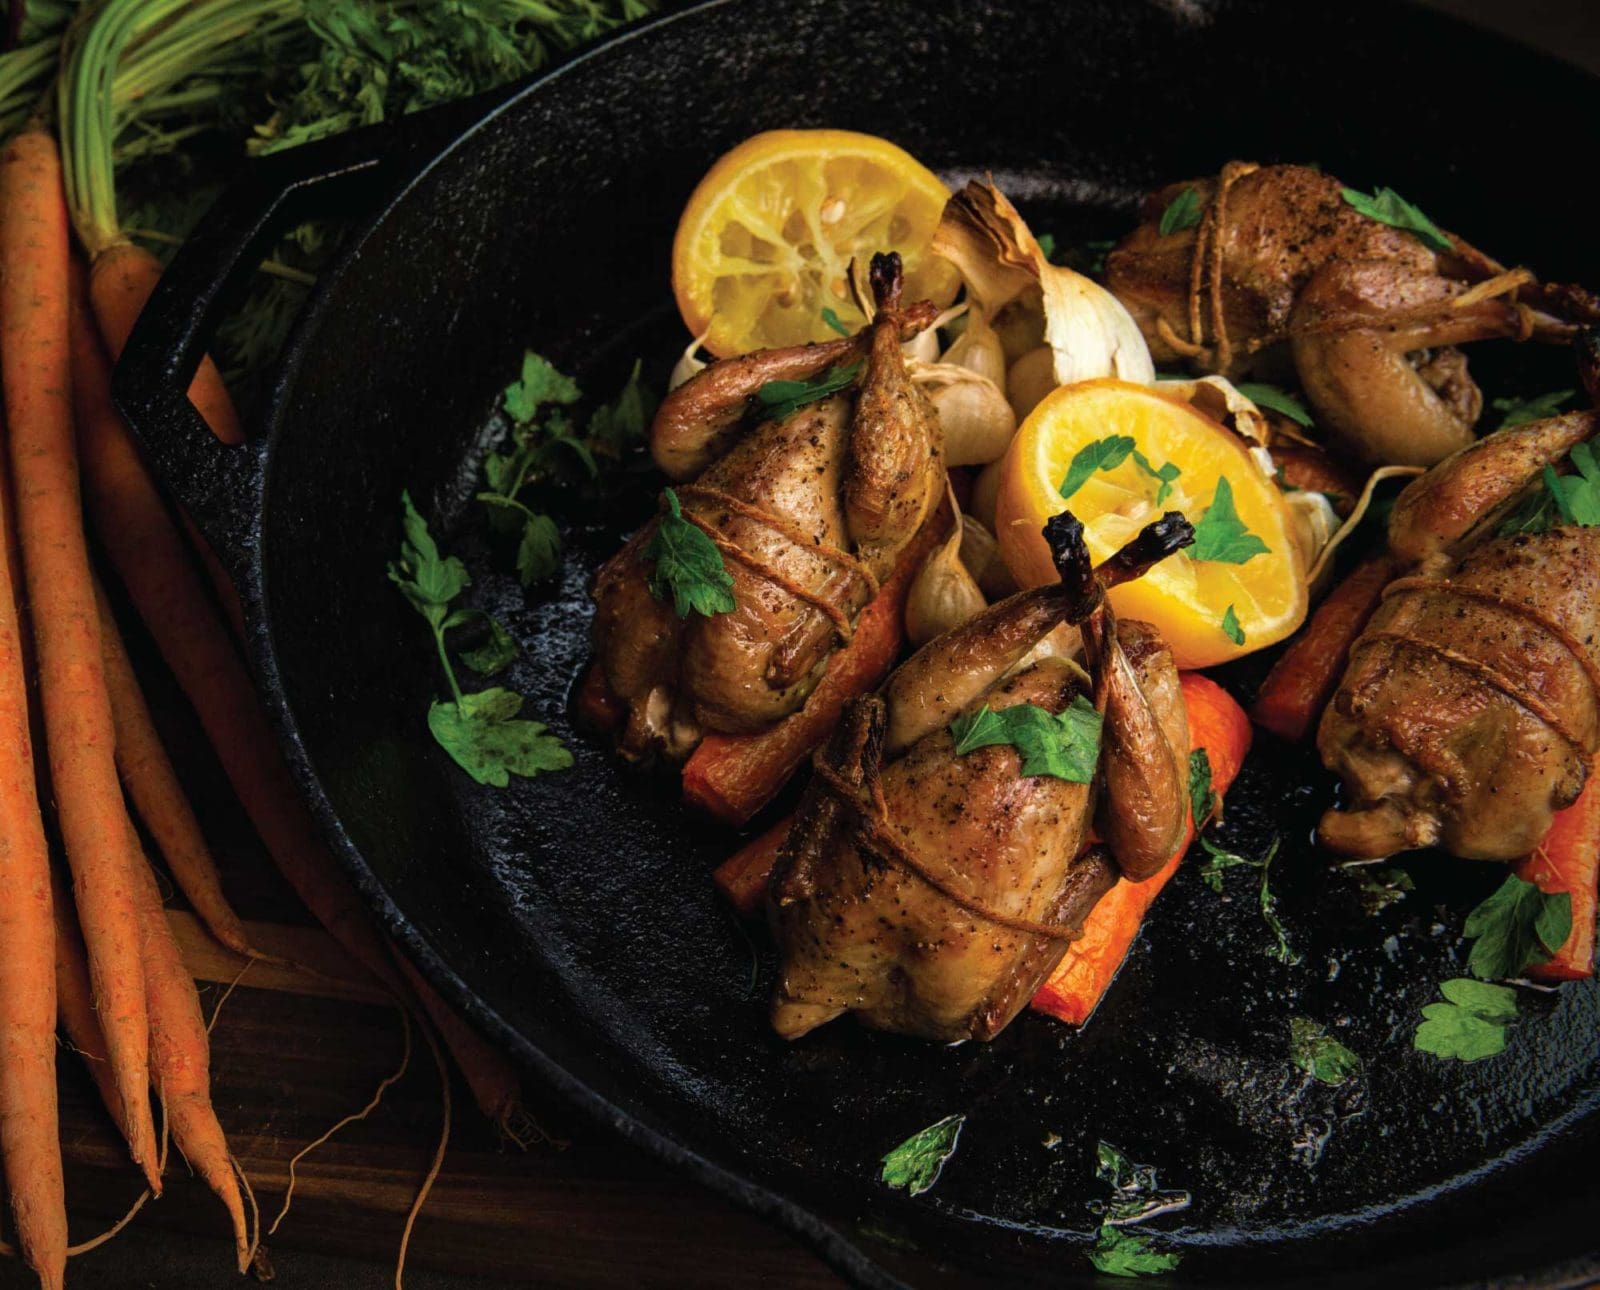 Perfectly roasted quail with vegetables